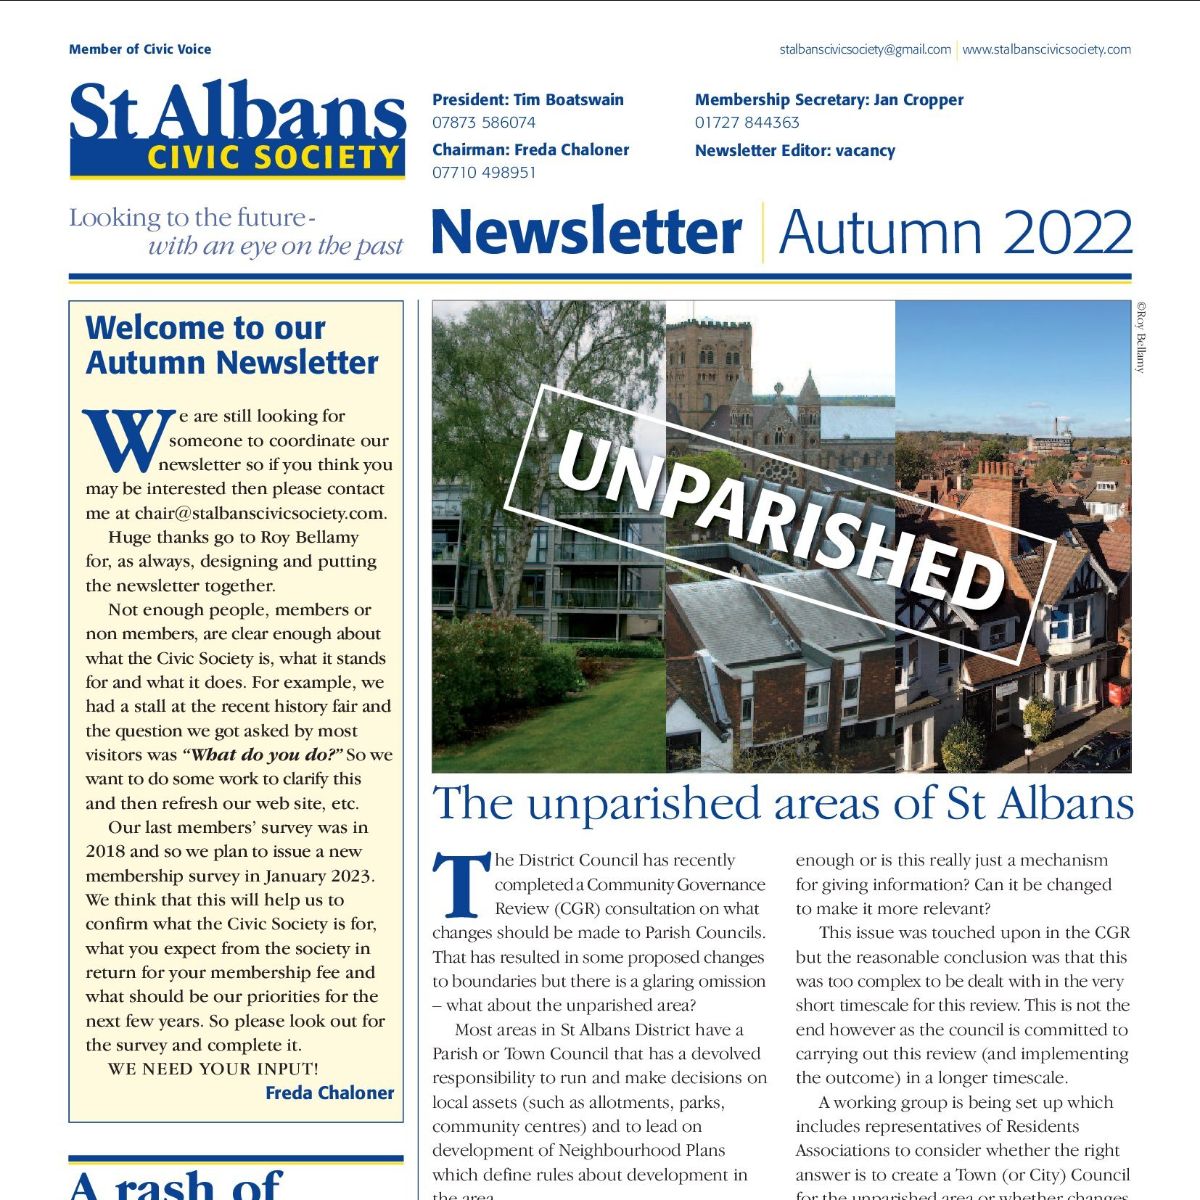 Latest newsletter from St Albans Civic Society - mailchi.mp/067486e37e60/5…